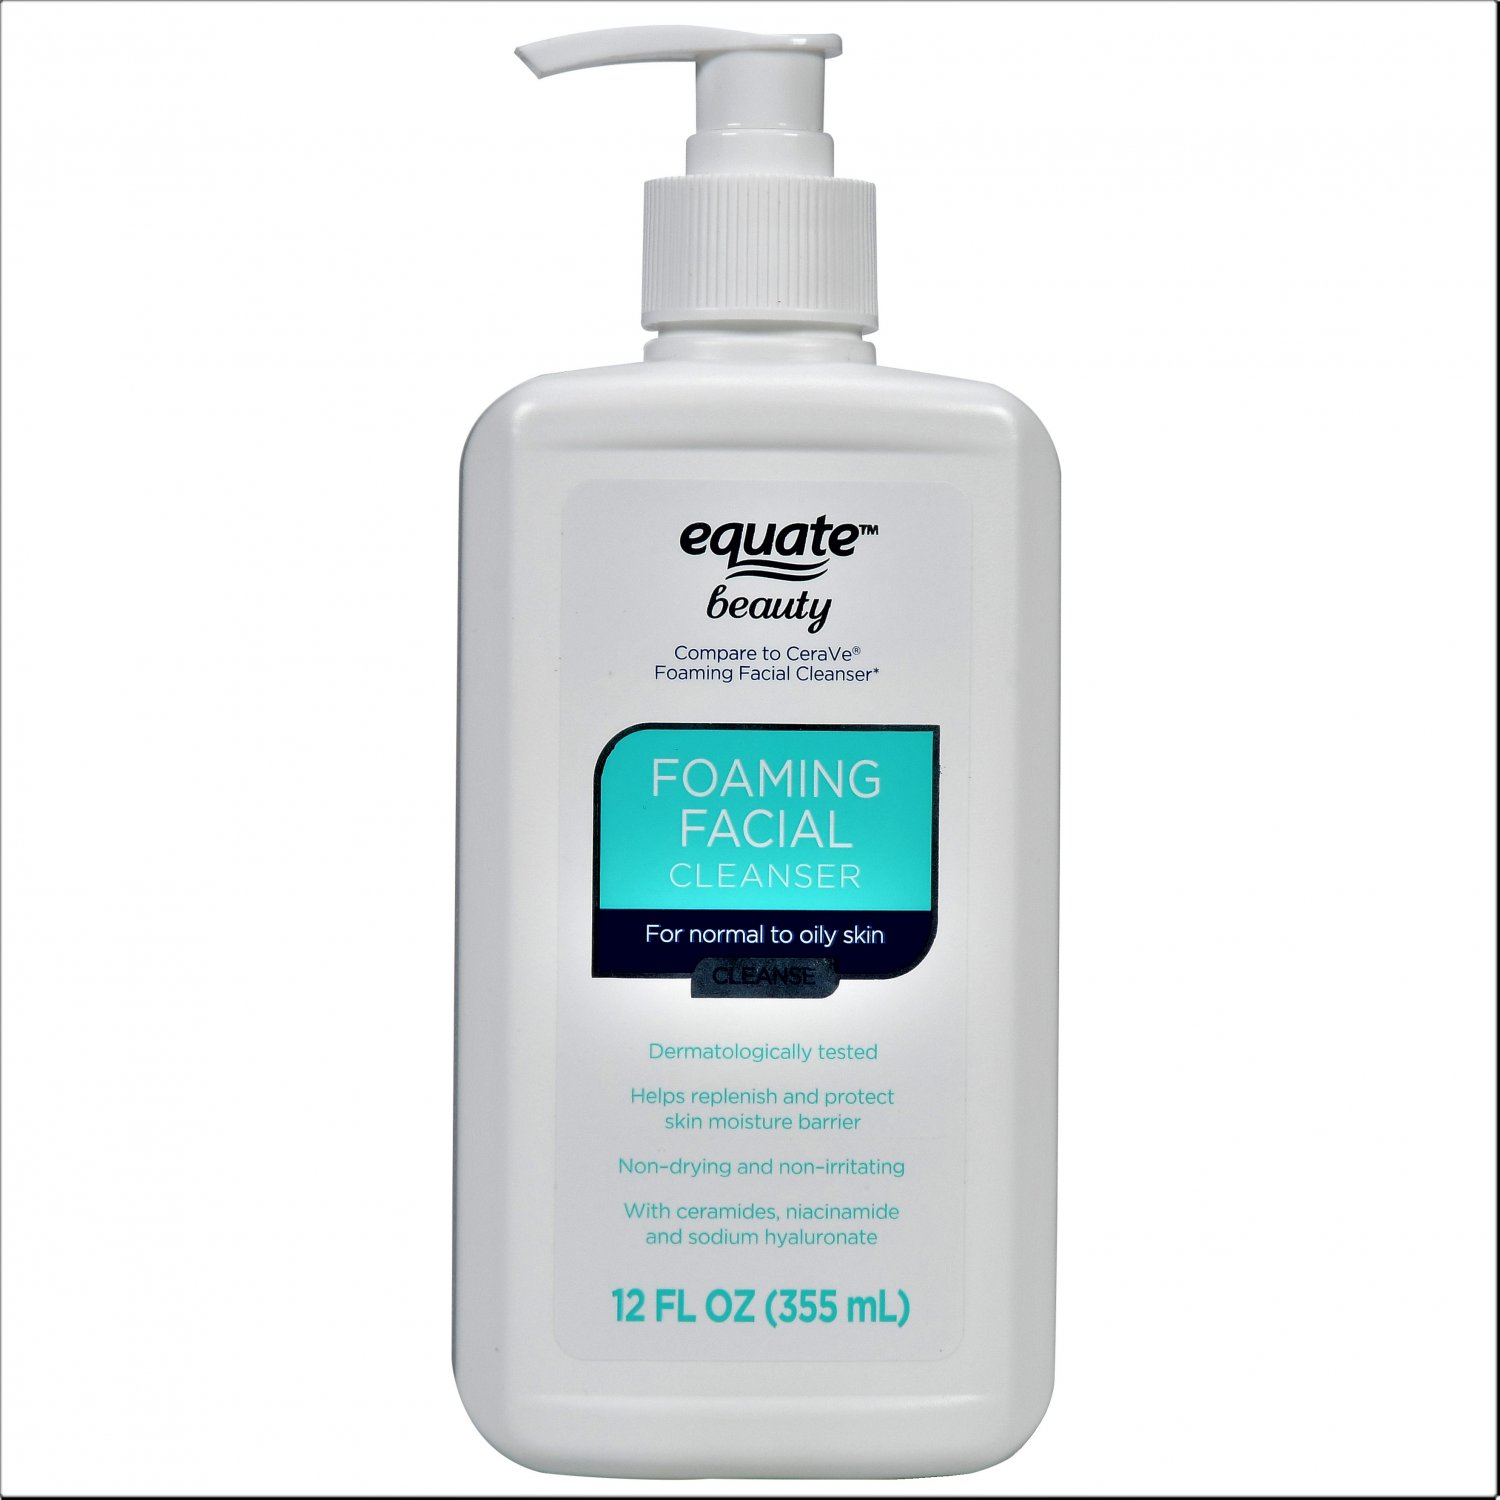 Equate Beauty Foaming Facial Cleanser 12 0z Bottle (Pack of 2)